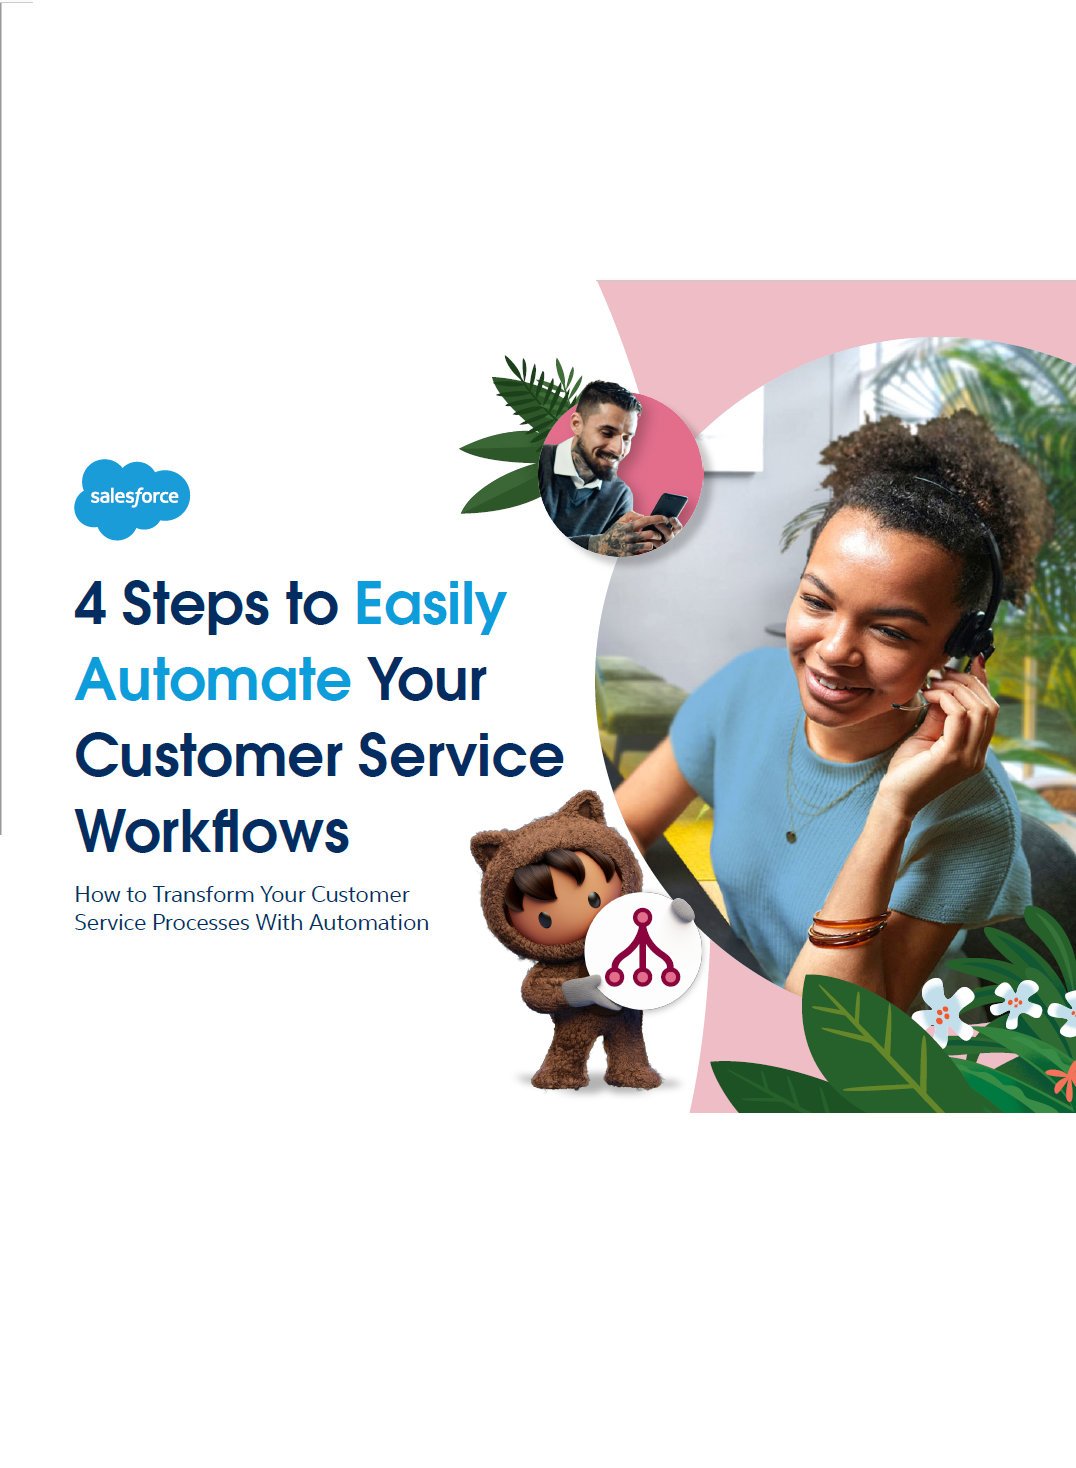 4 Steps to Easily Automate Your Customer Service Workflows